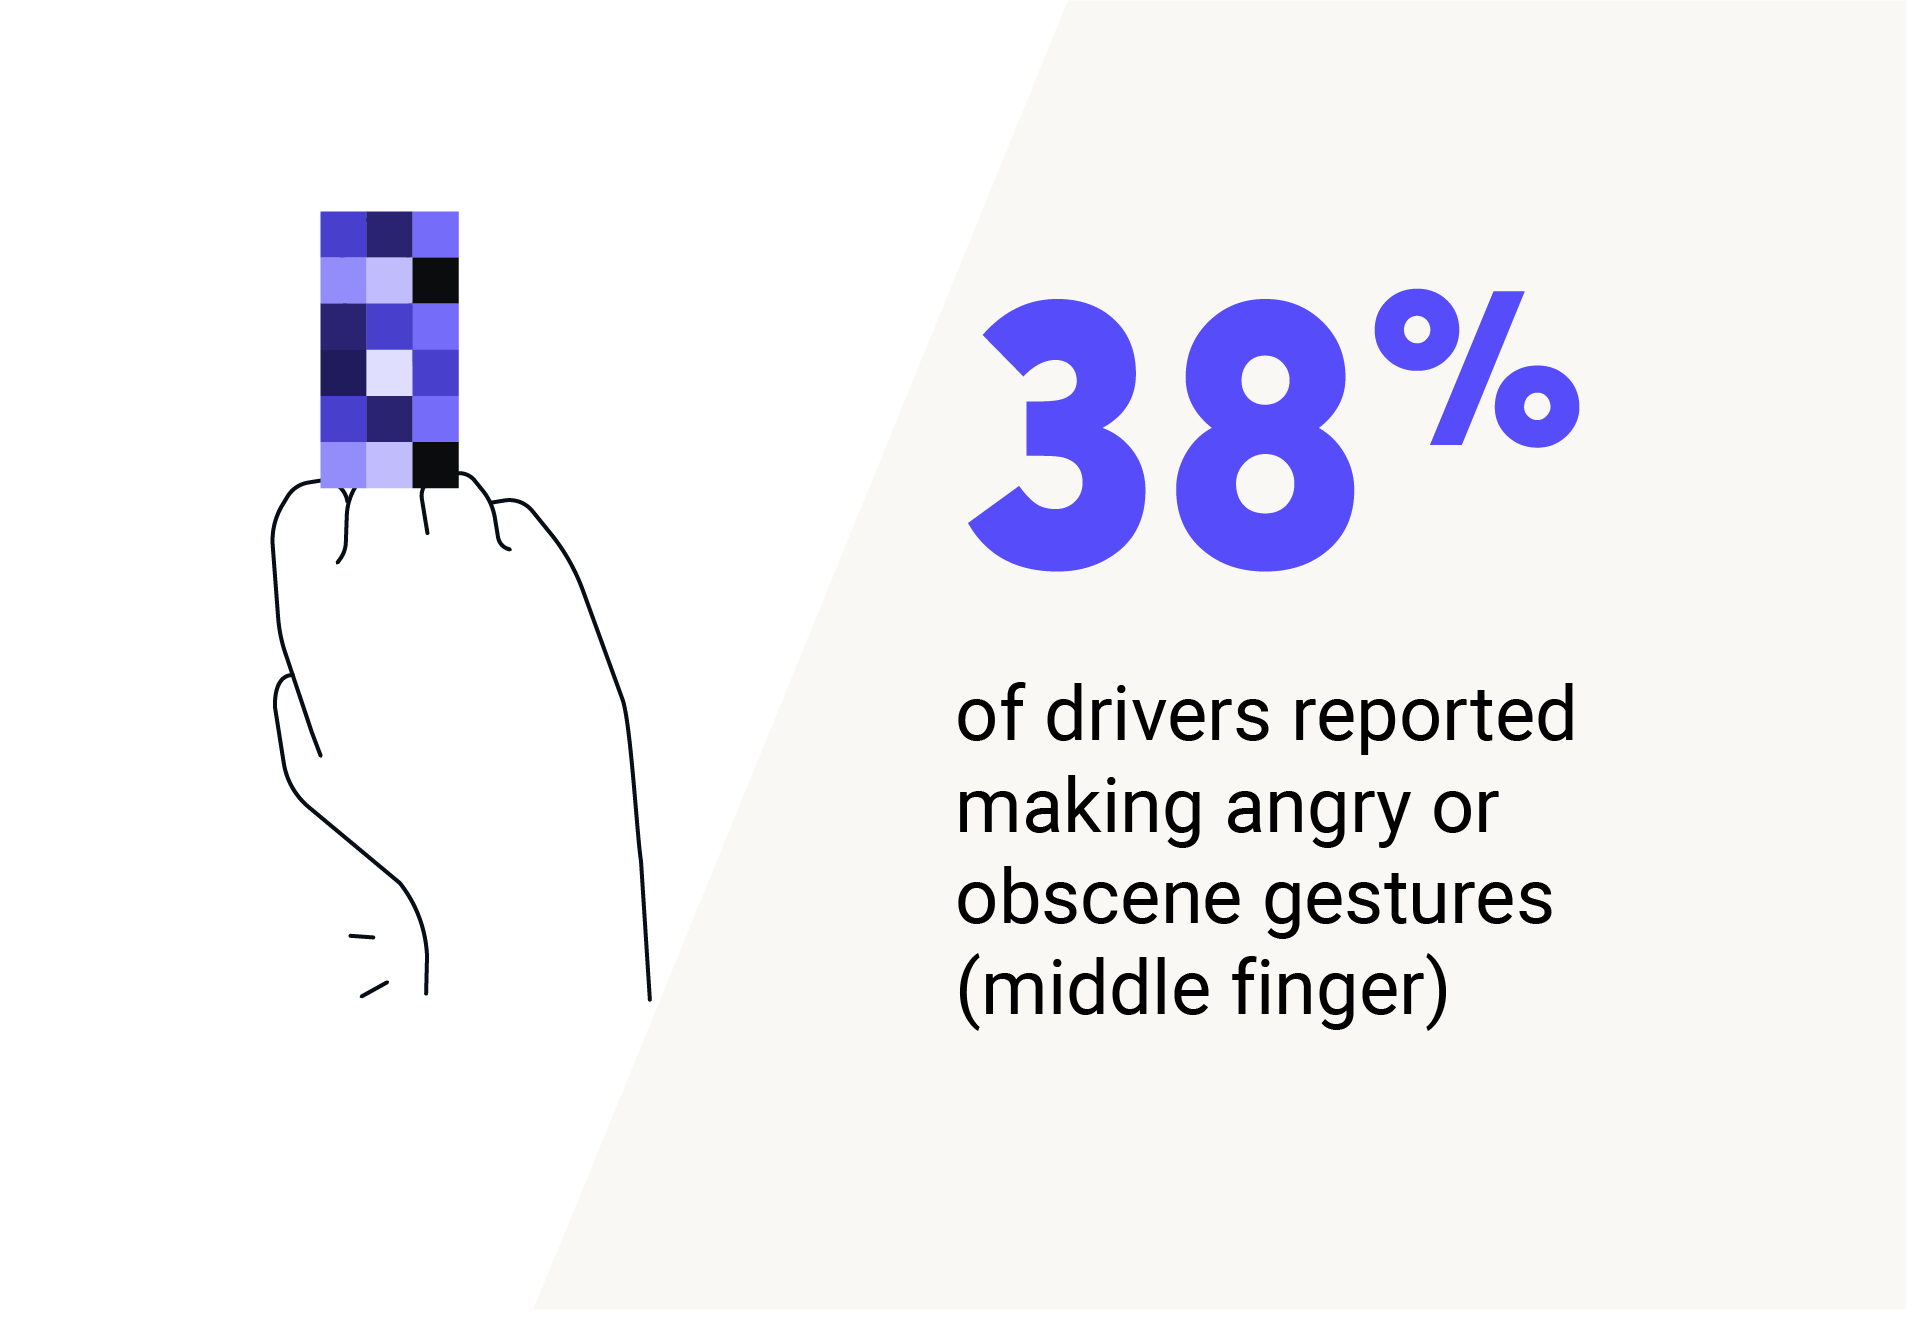 38% of drivers reported making angry or obscene gestures (middle finger)